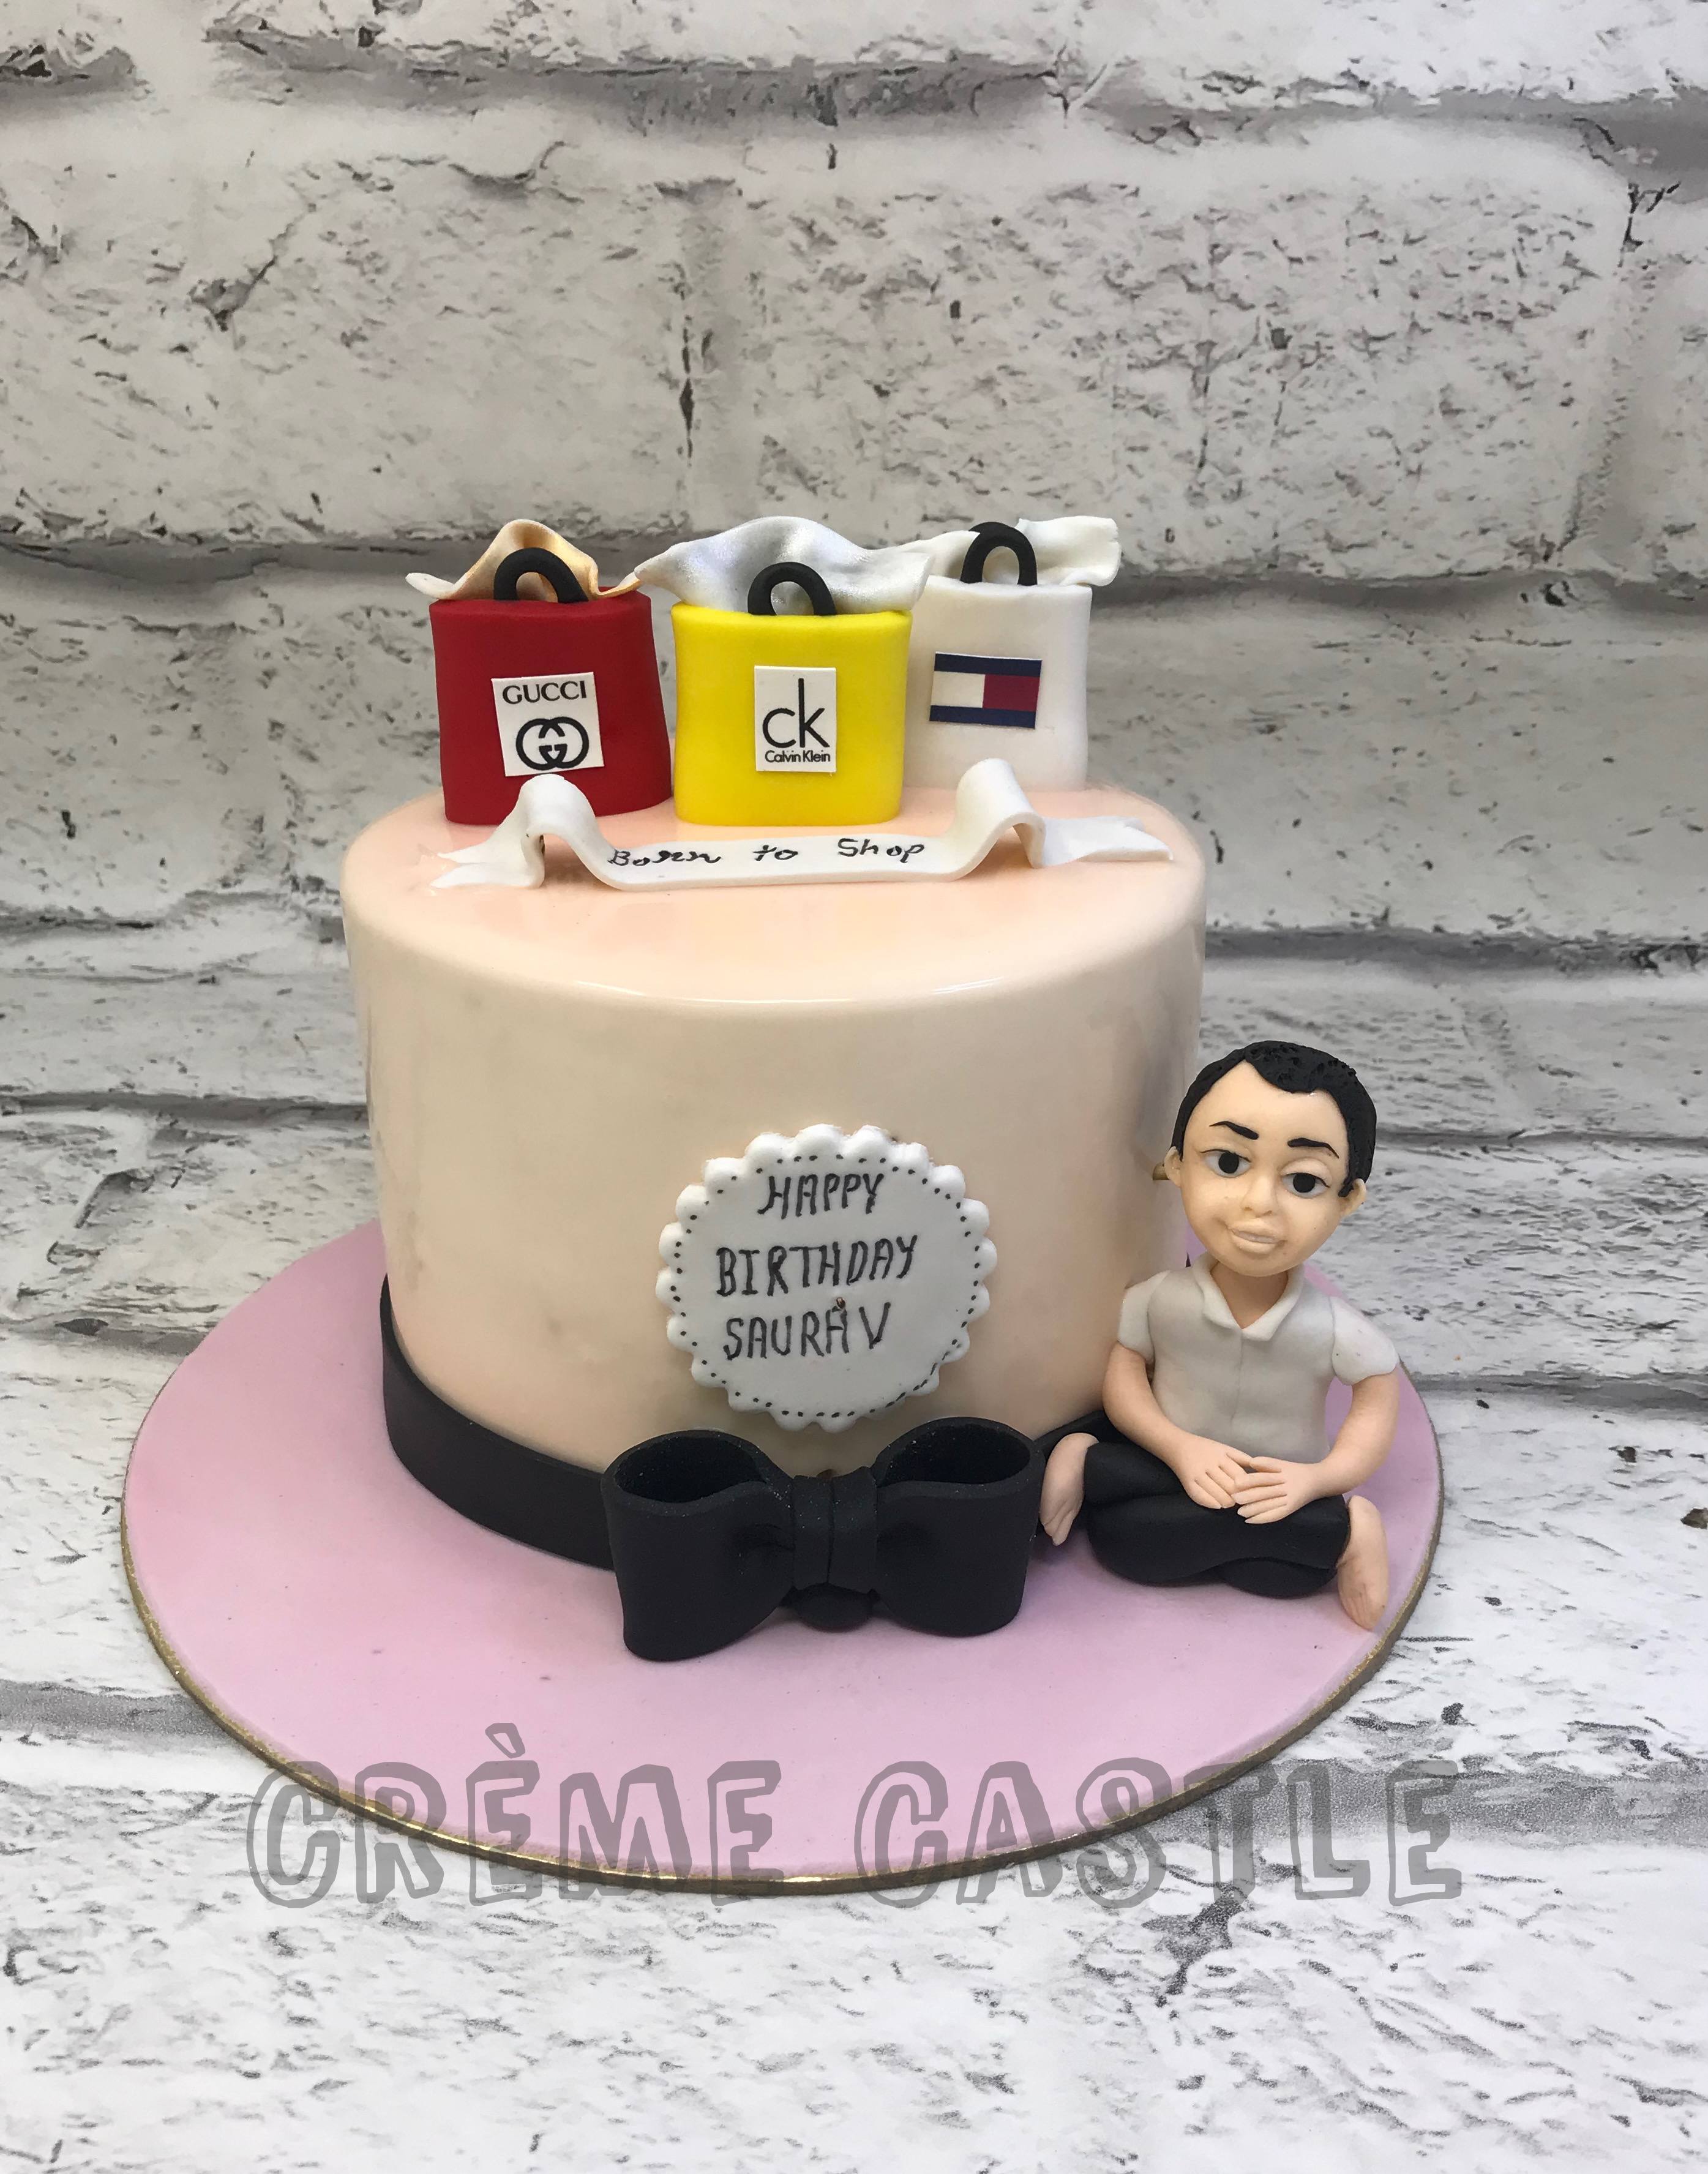 Corporate Theme Cakes | Delivery in Noida & Gurgaon - Creme Castle